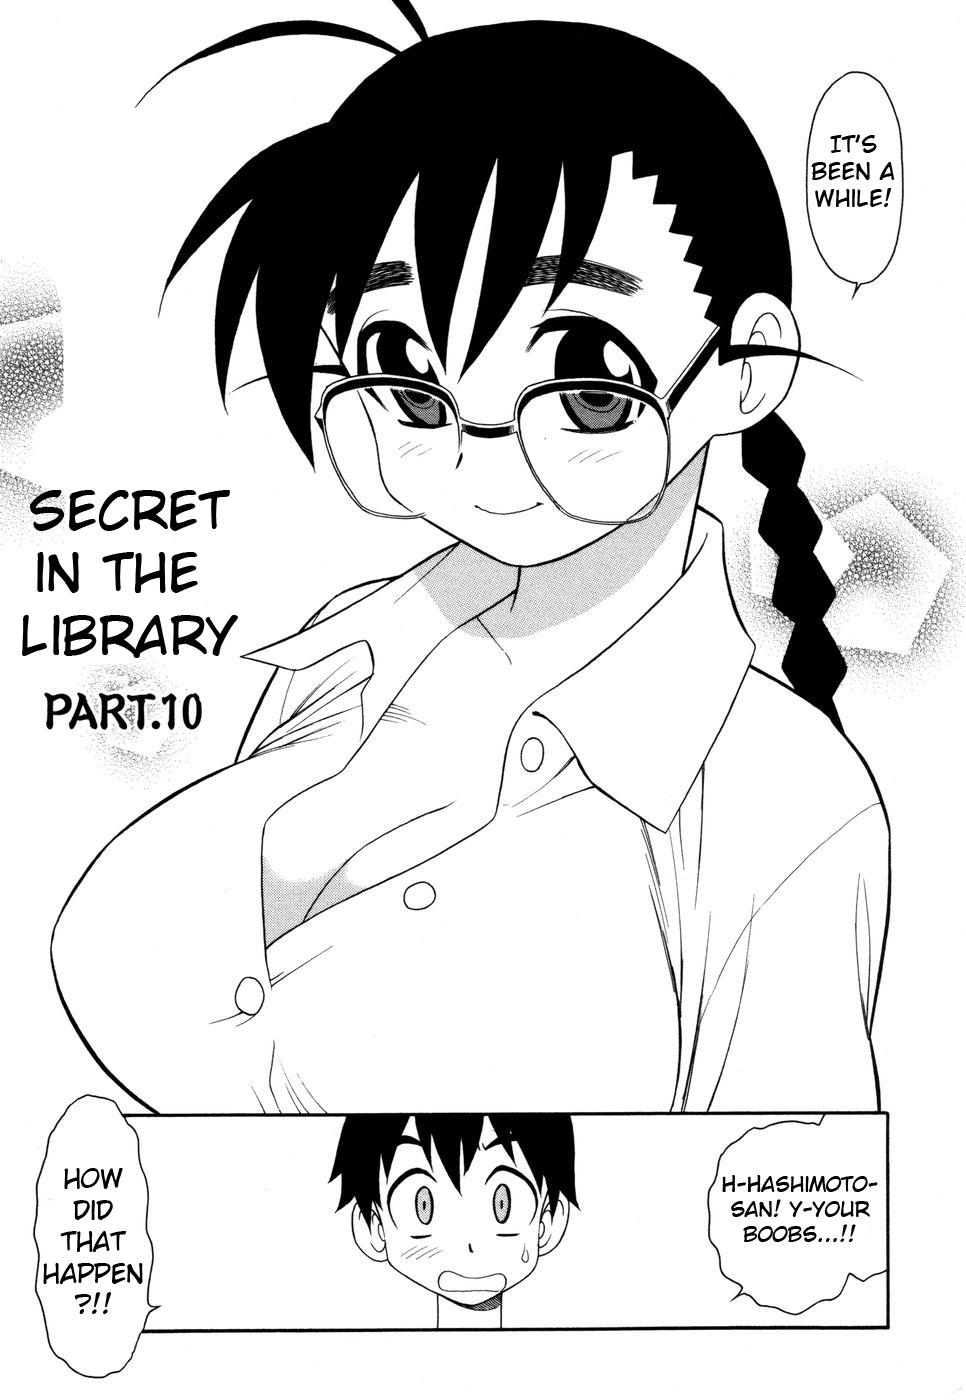 Toshoshitsu no Himitsu - Secret In Library. | Secret In The Library 137